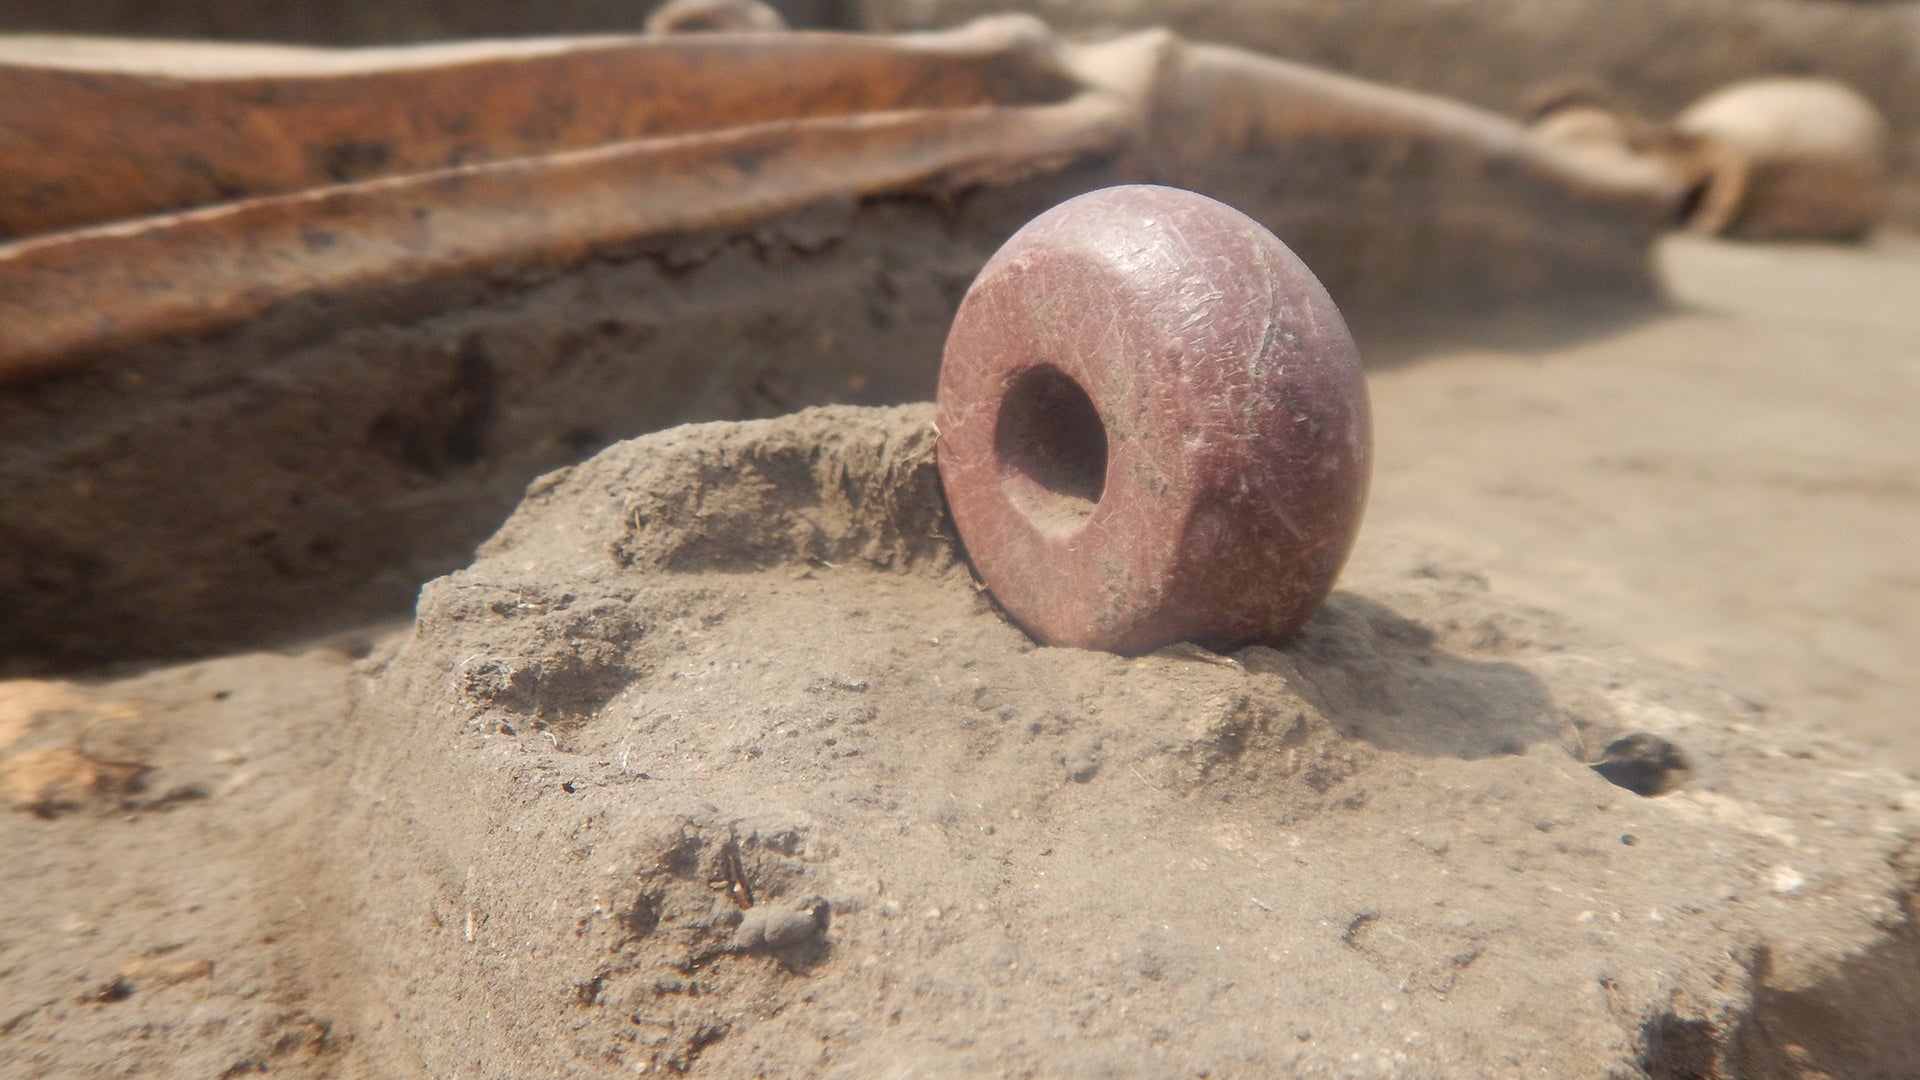 Archaeologists also found a stone altar, as well as bracelets and beads